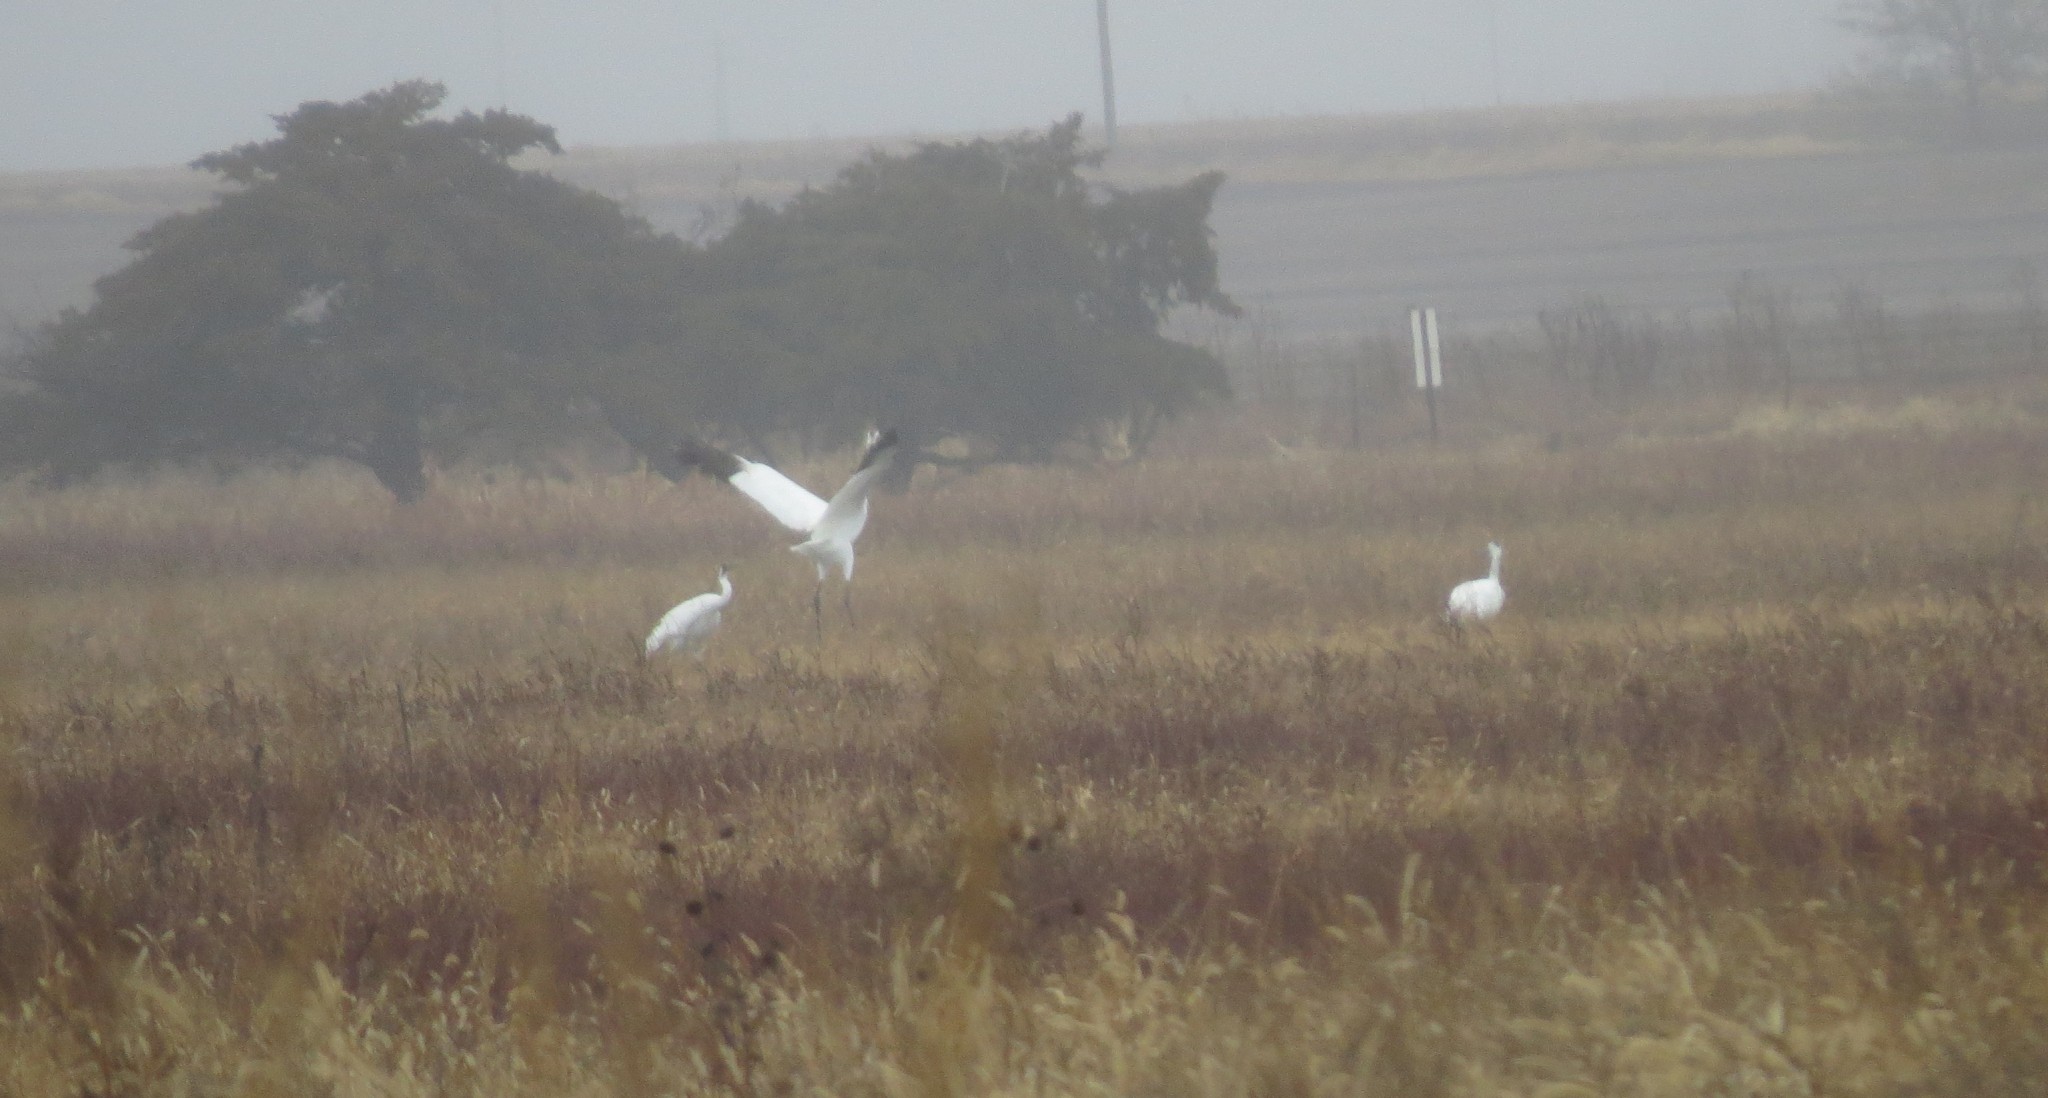 Whooping Crane Migration